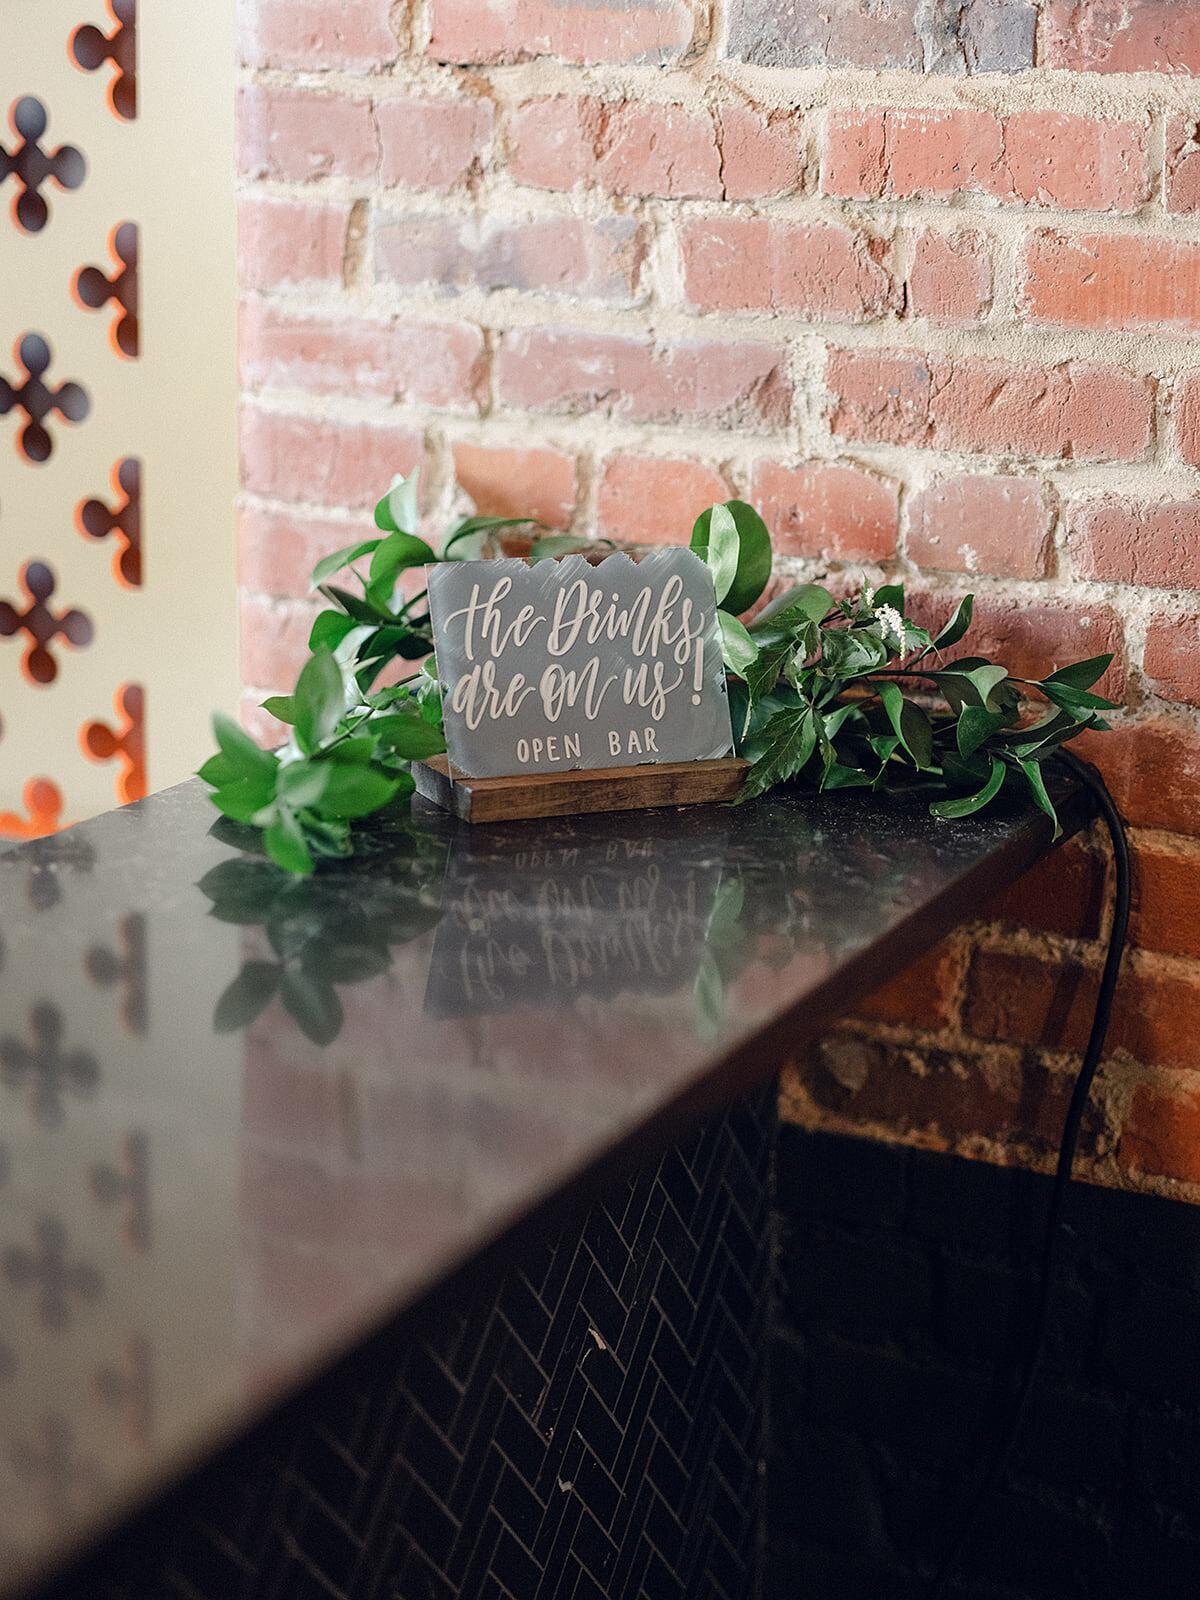 Black granite bar at Clementine hall with an exposed brick wall and gold filigree accents with a  wood bar sign decorated with greenery